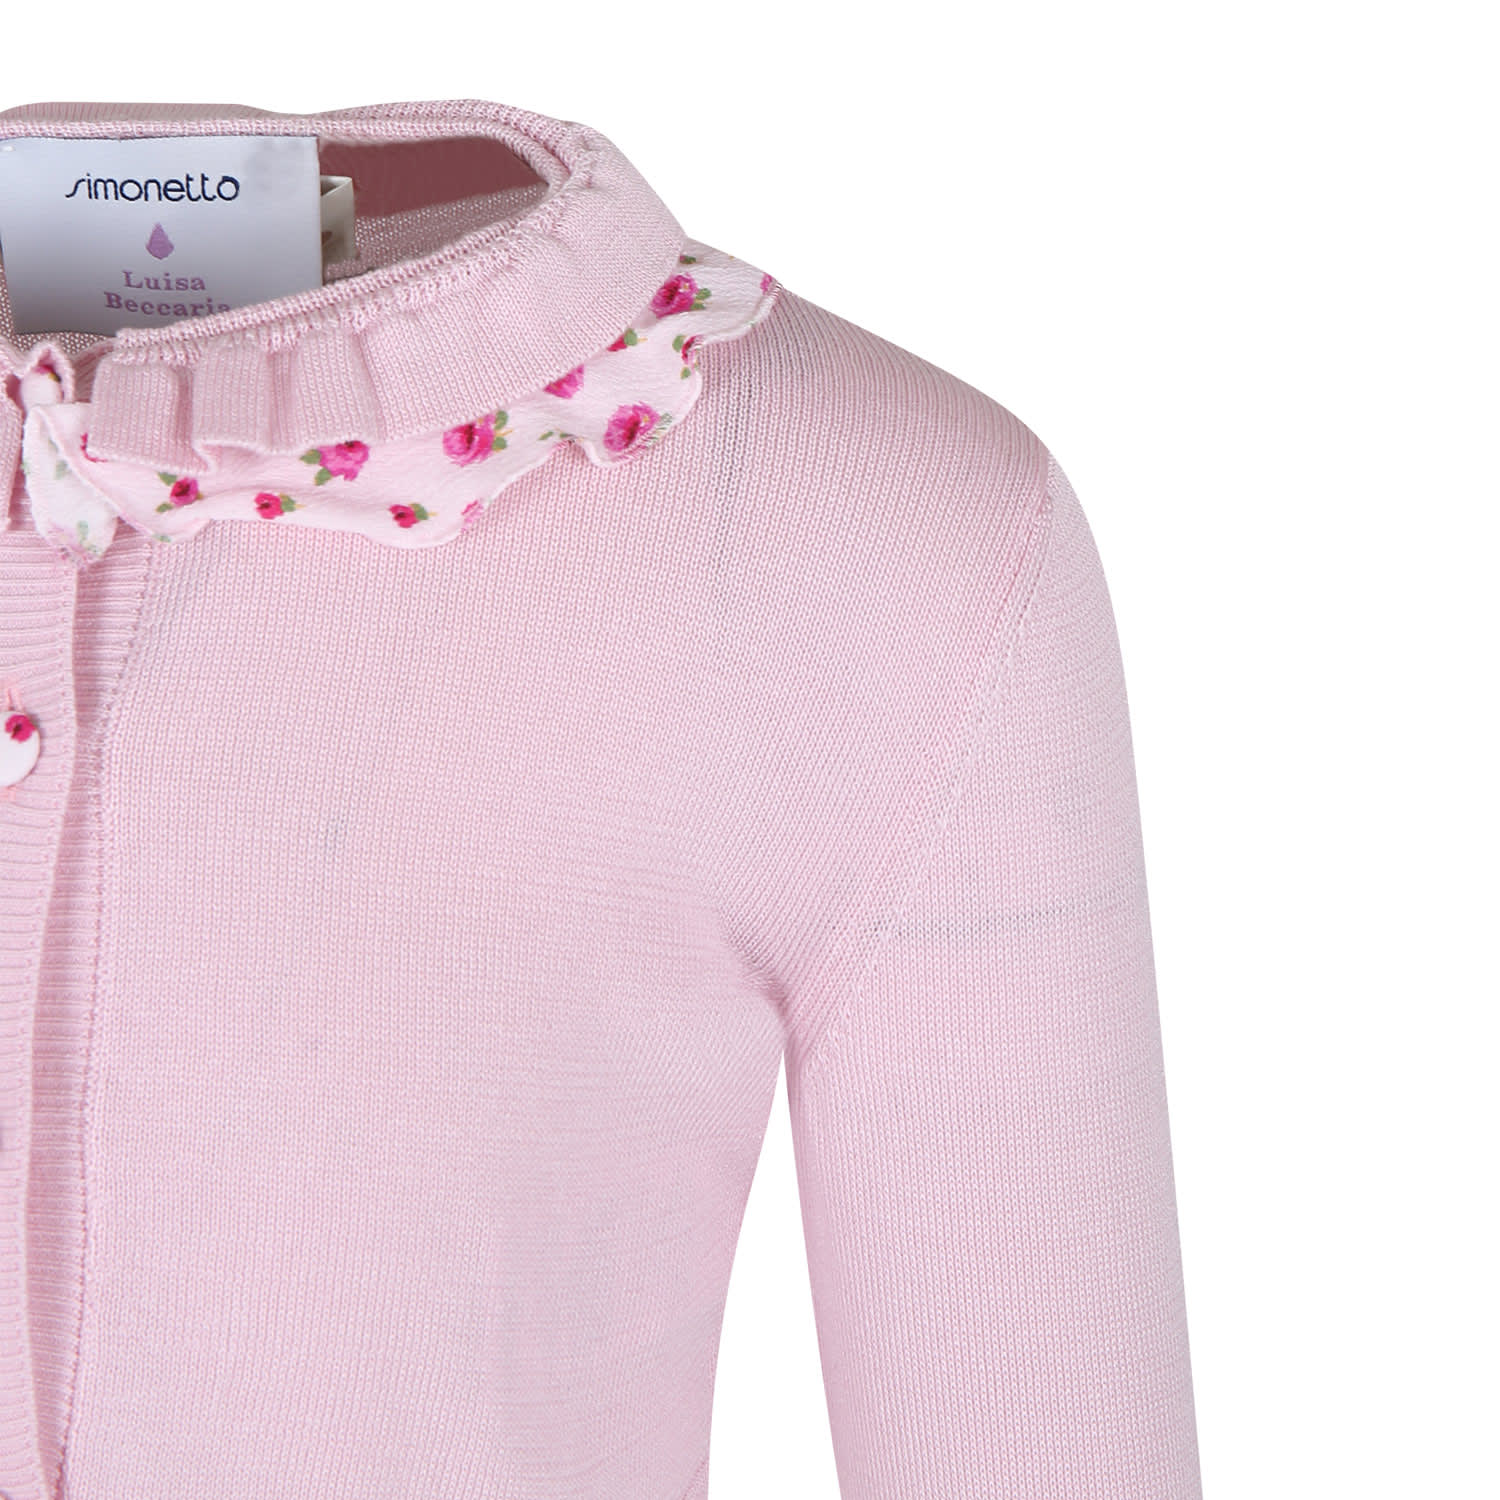 Shop Simonetta Pink Cardigan For Girl With Flowers Print